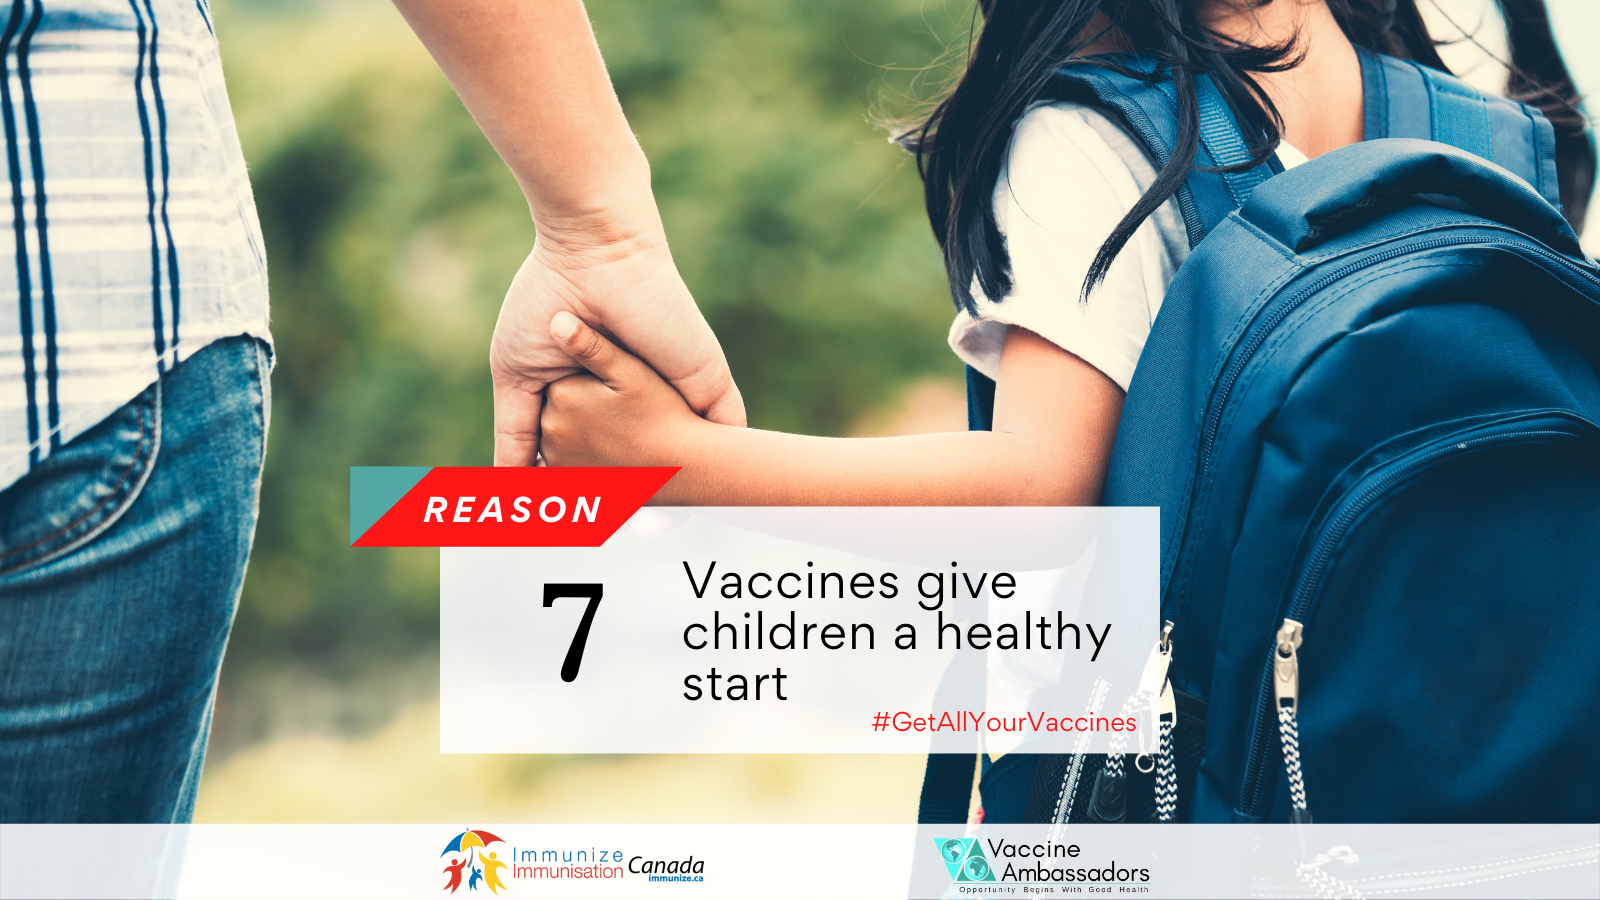 Reason 7 - Vaccines give children a healthy start - Twitter